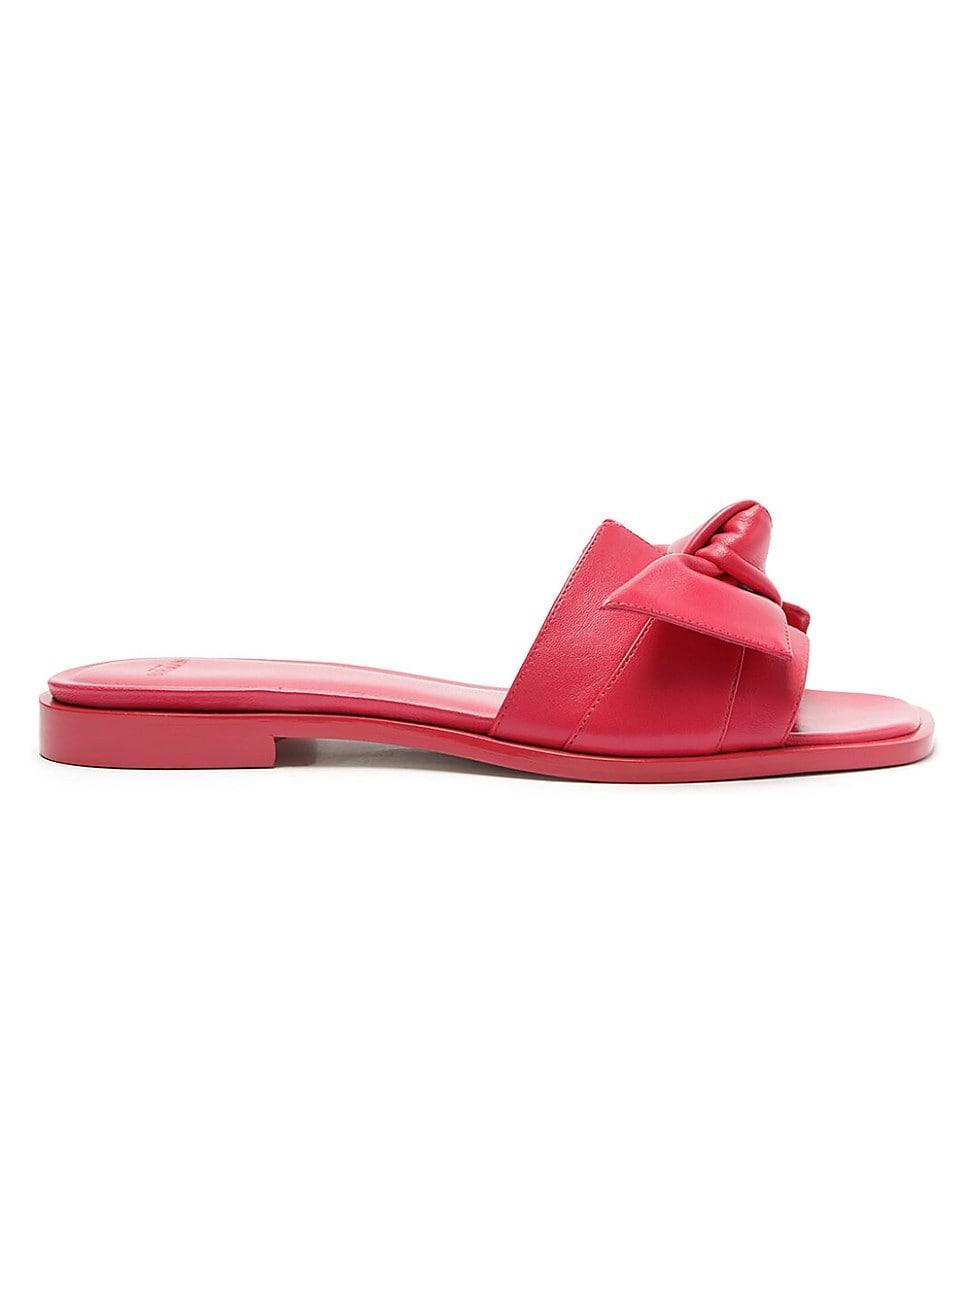 Womens Maxi Clarita Leather Sandals Product Image